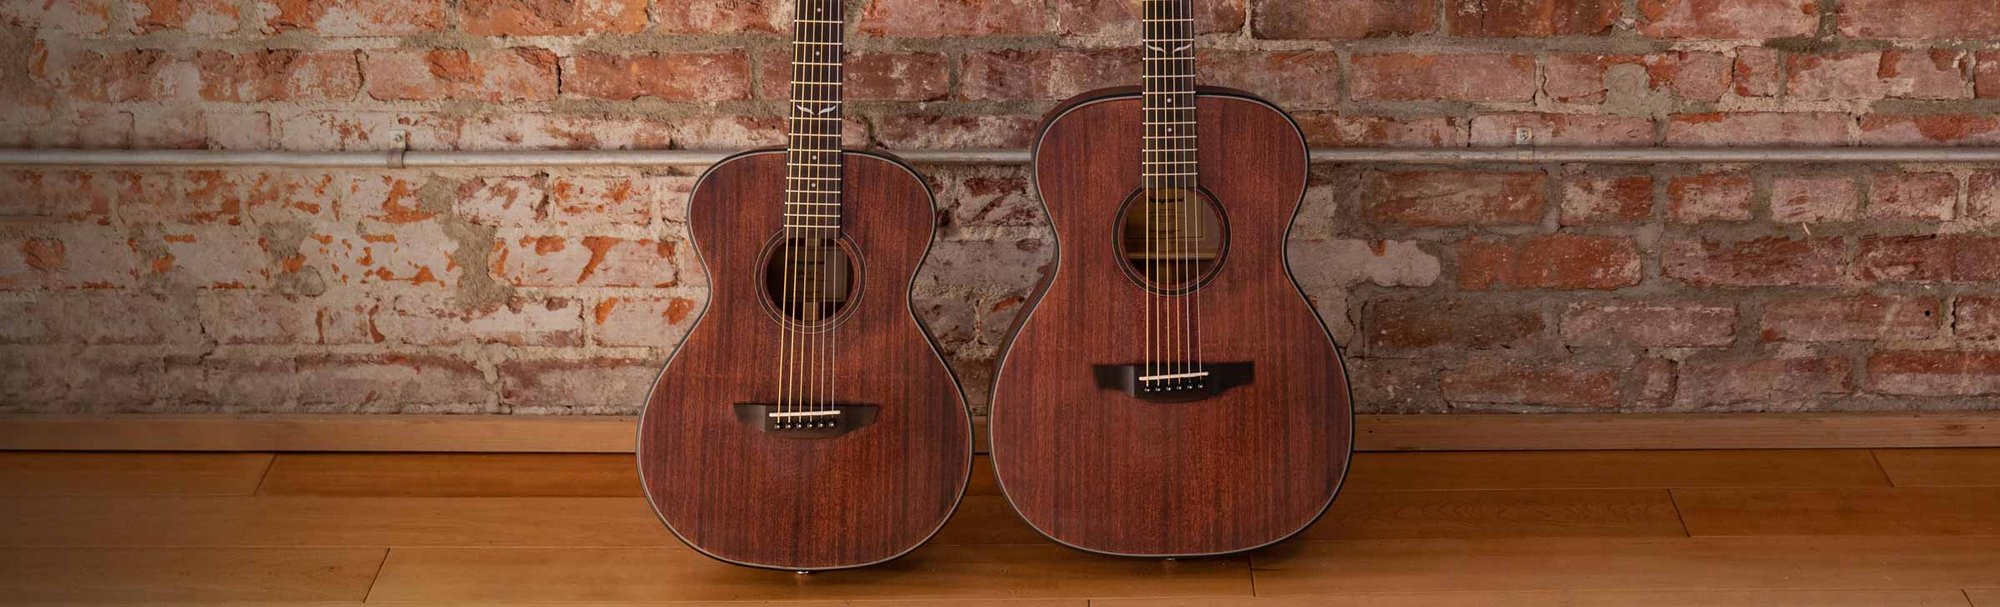 The Oliver Jr. Mahogany and Oliver Spruce guitars resting on a sofa.